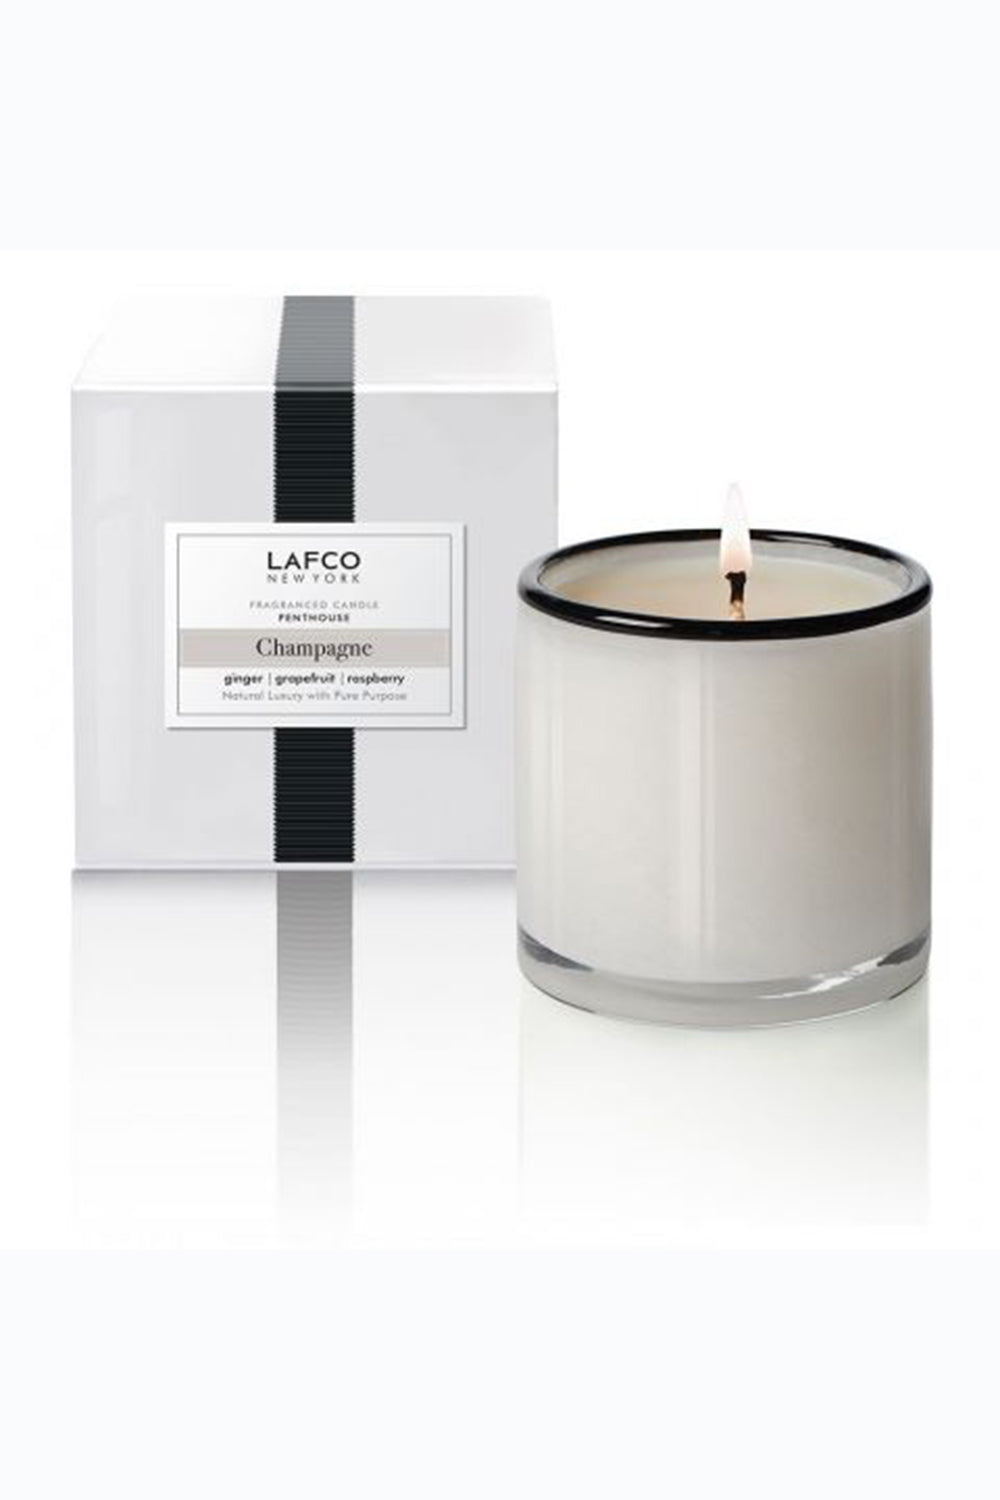 Lafco Candle - "Penthouse" Champagne